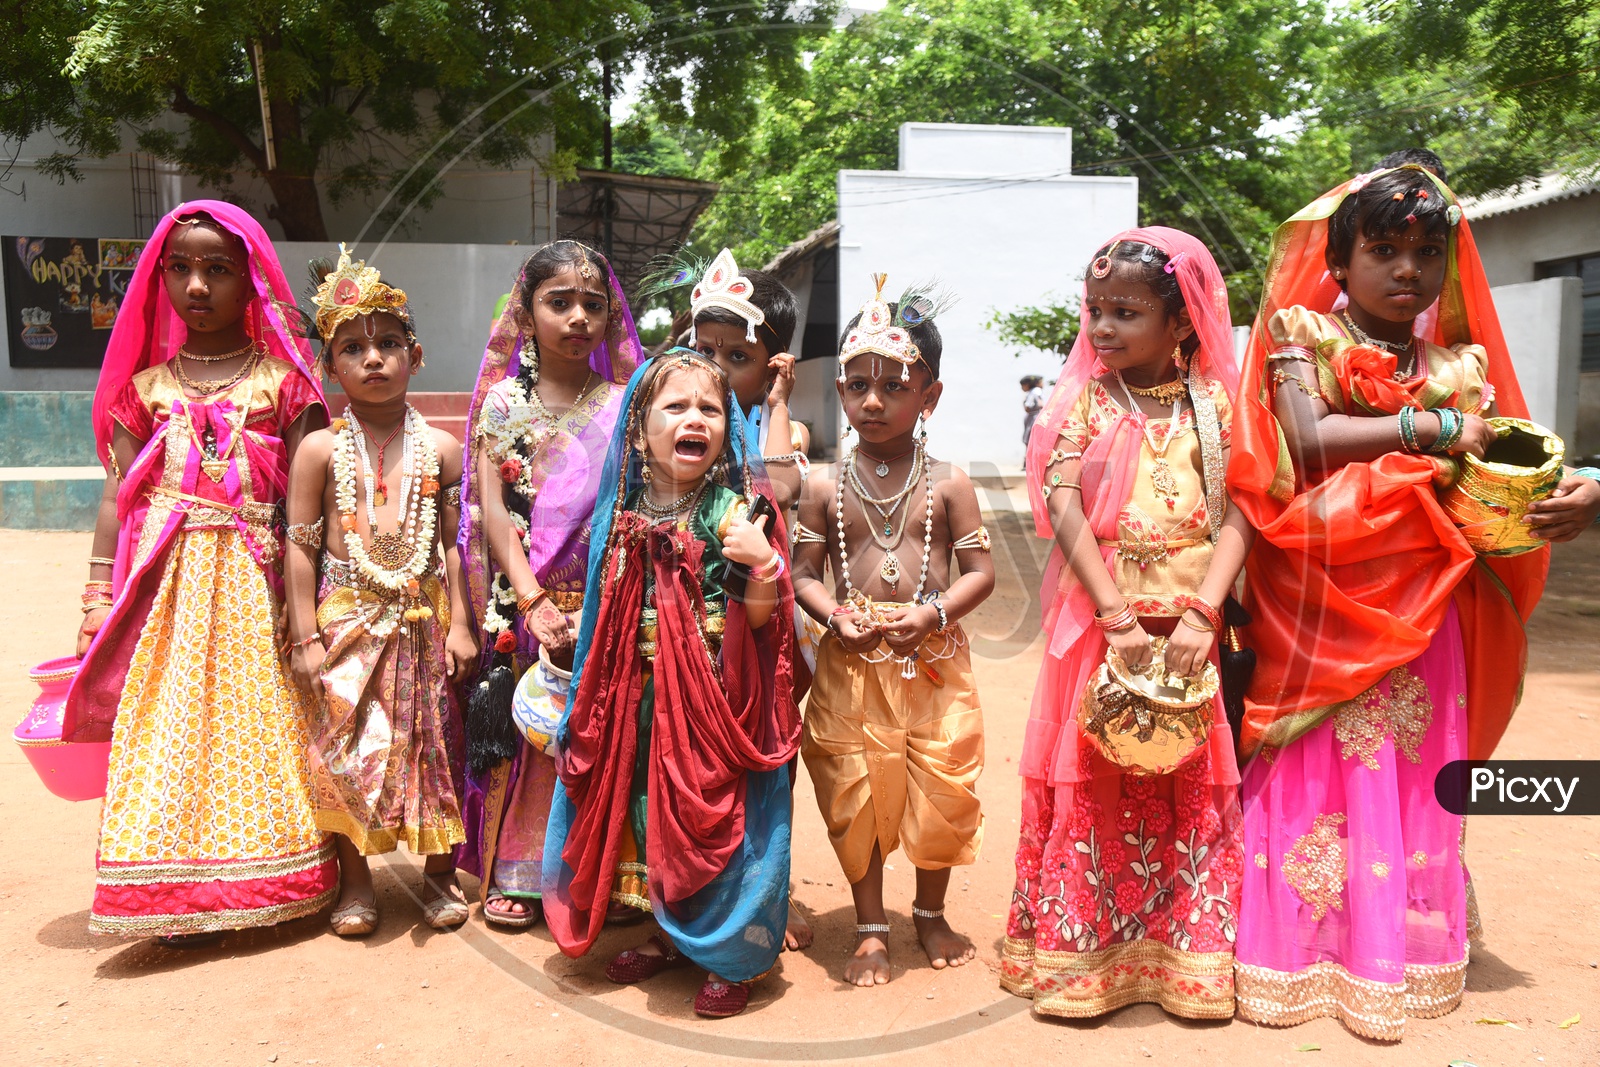 Little girls dressed as Gopika with pots in hand and Little boys dressed as Lord Krishna with a peacock feather on his head and a flute in his hand